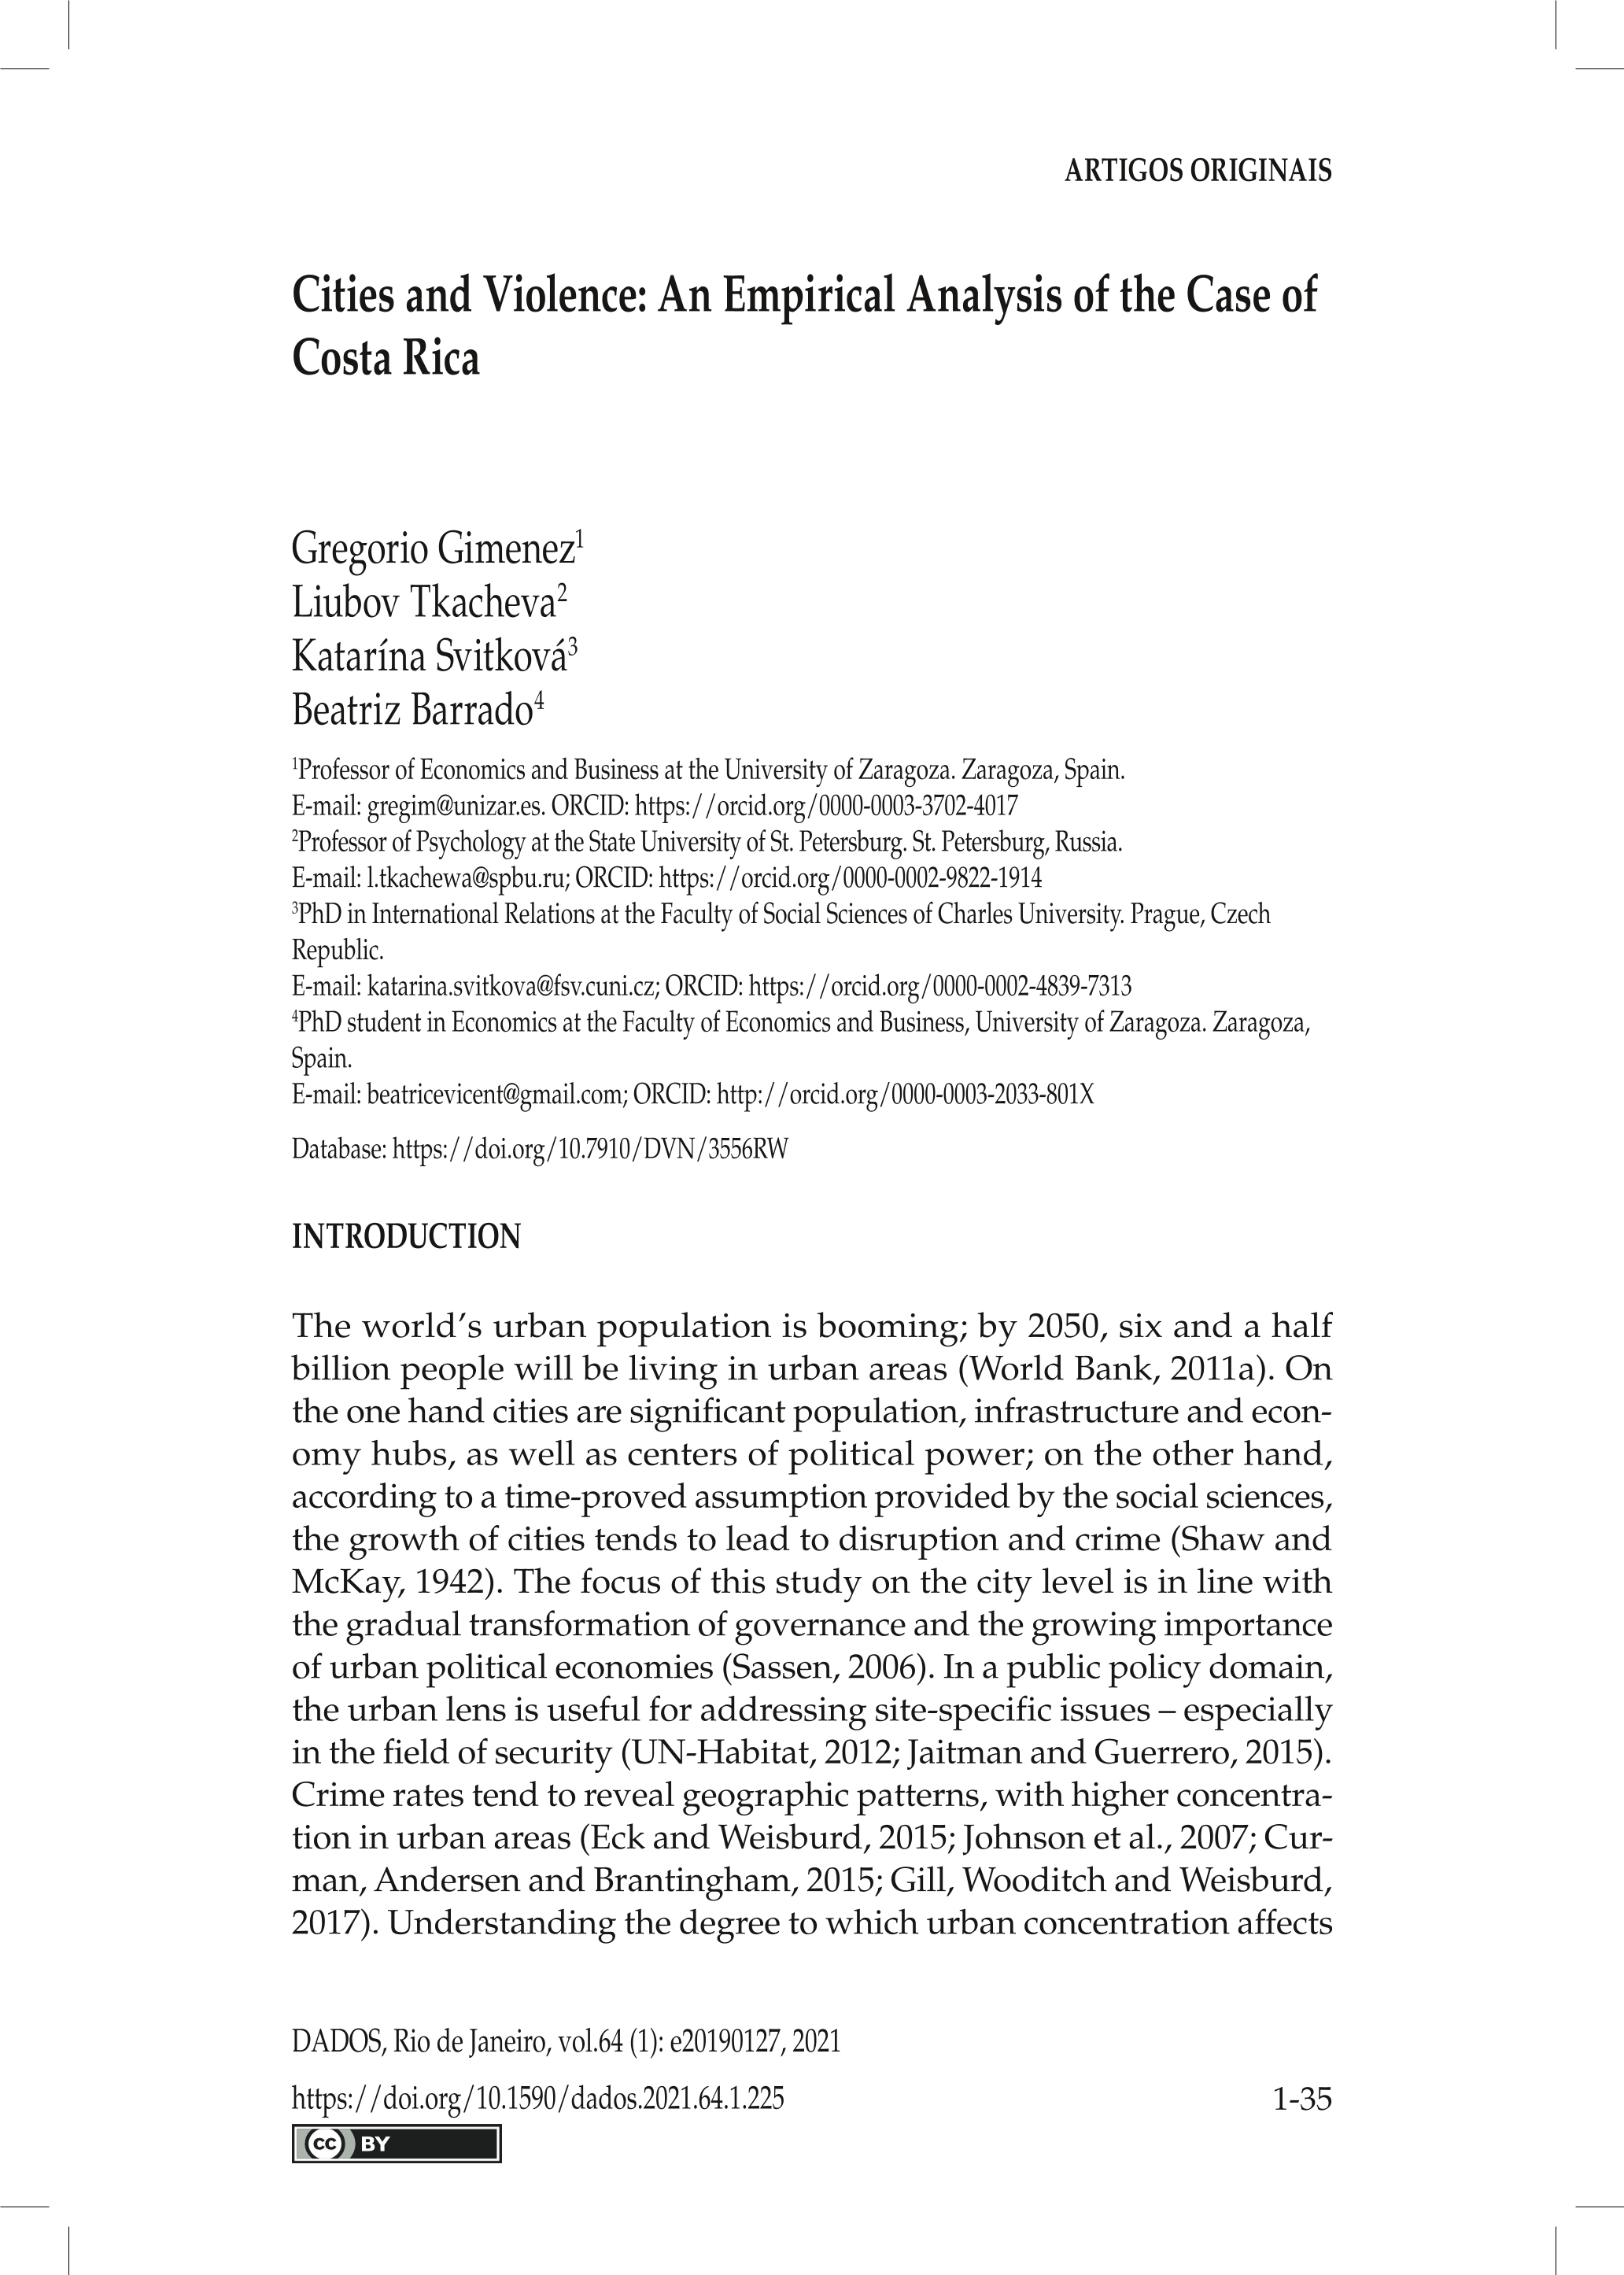 Cities and Violence: An Empirical Analysis of the Case of Costa Rica